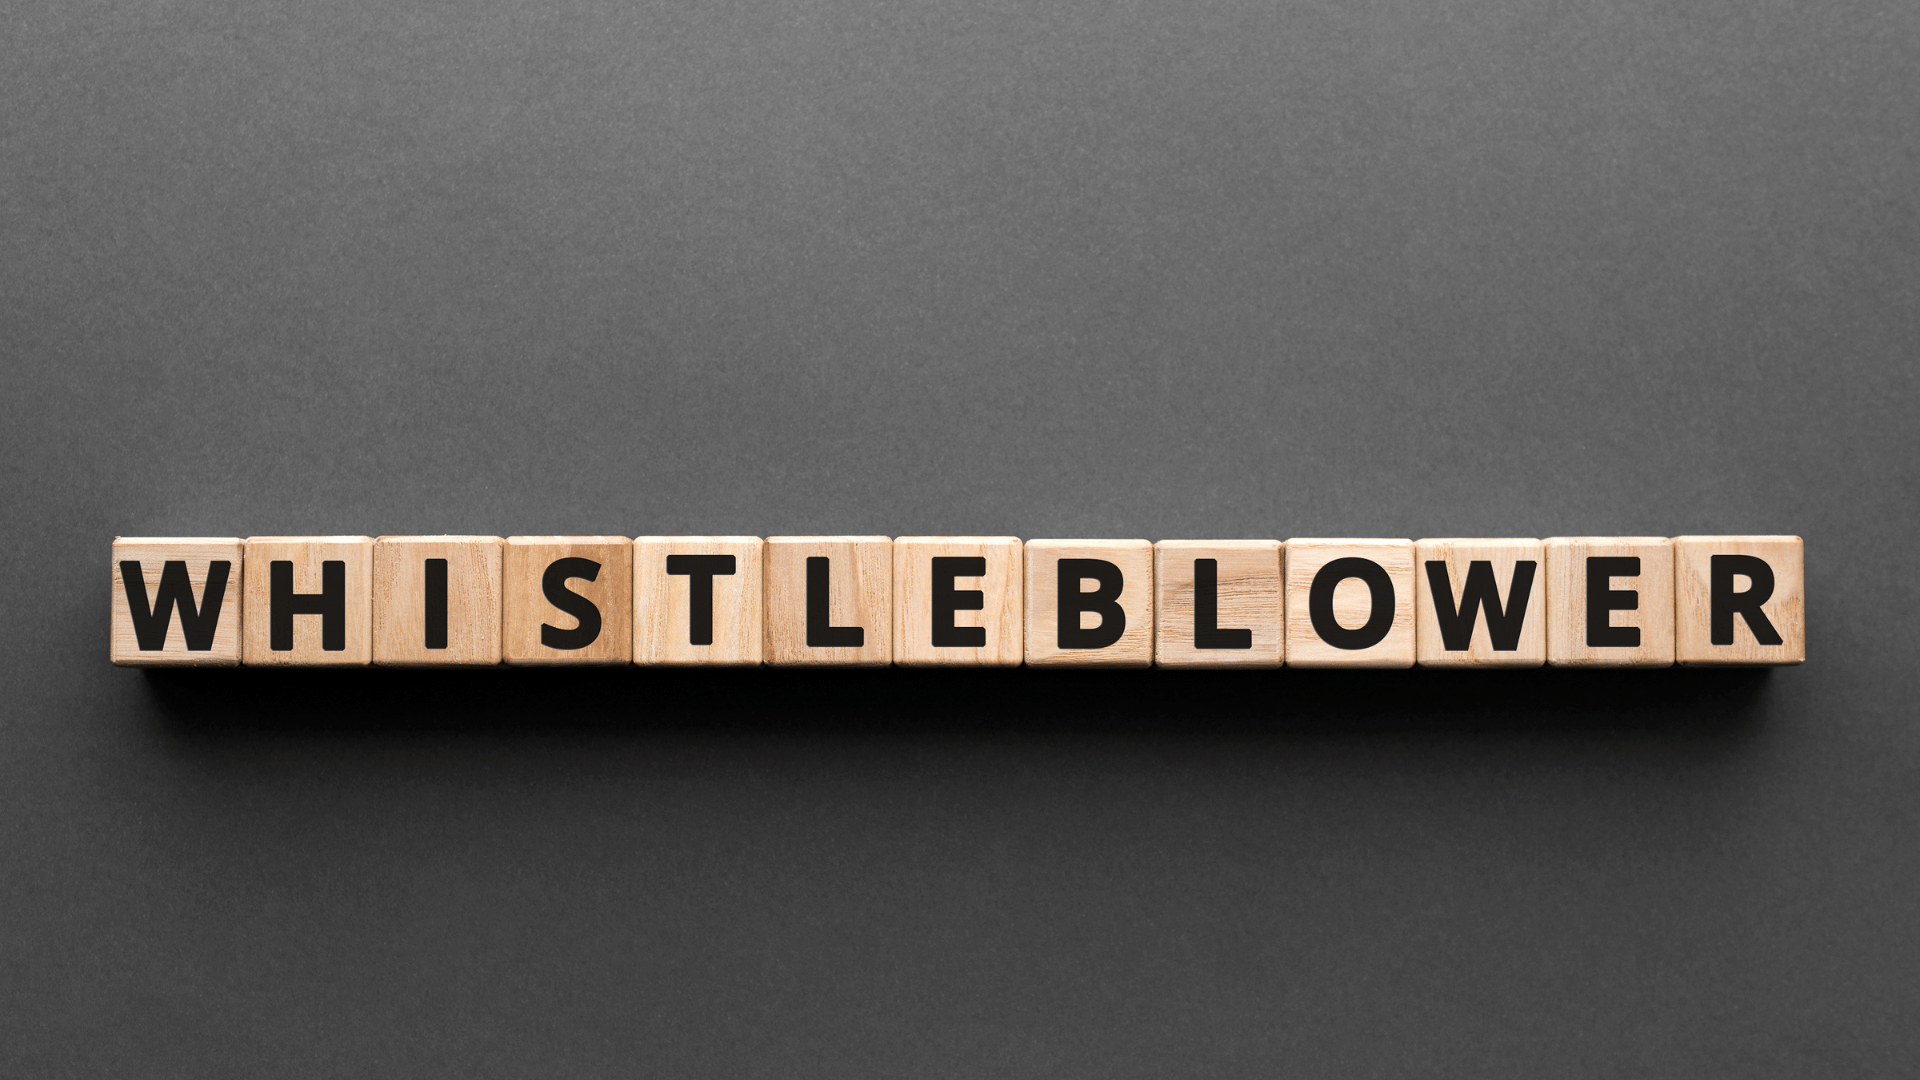 Does a Whistleblower Have to Be an Employee?